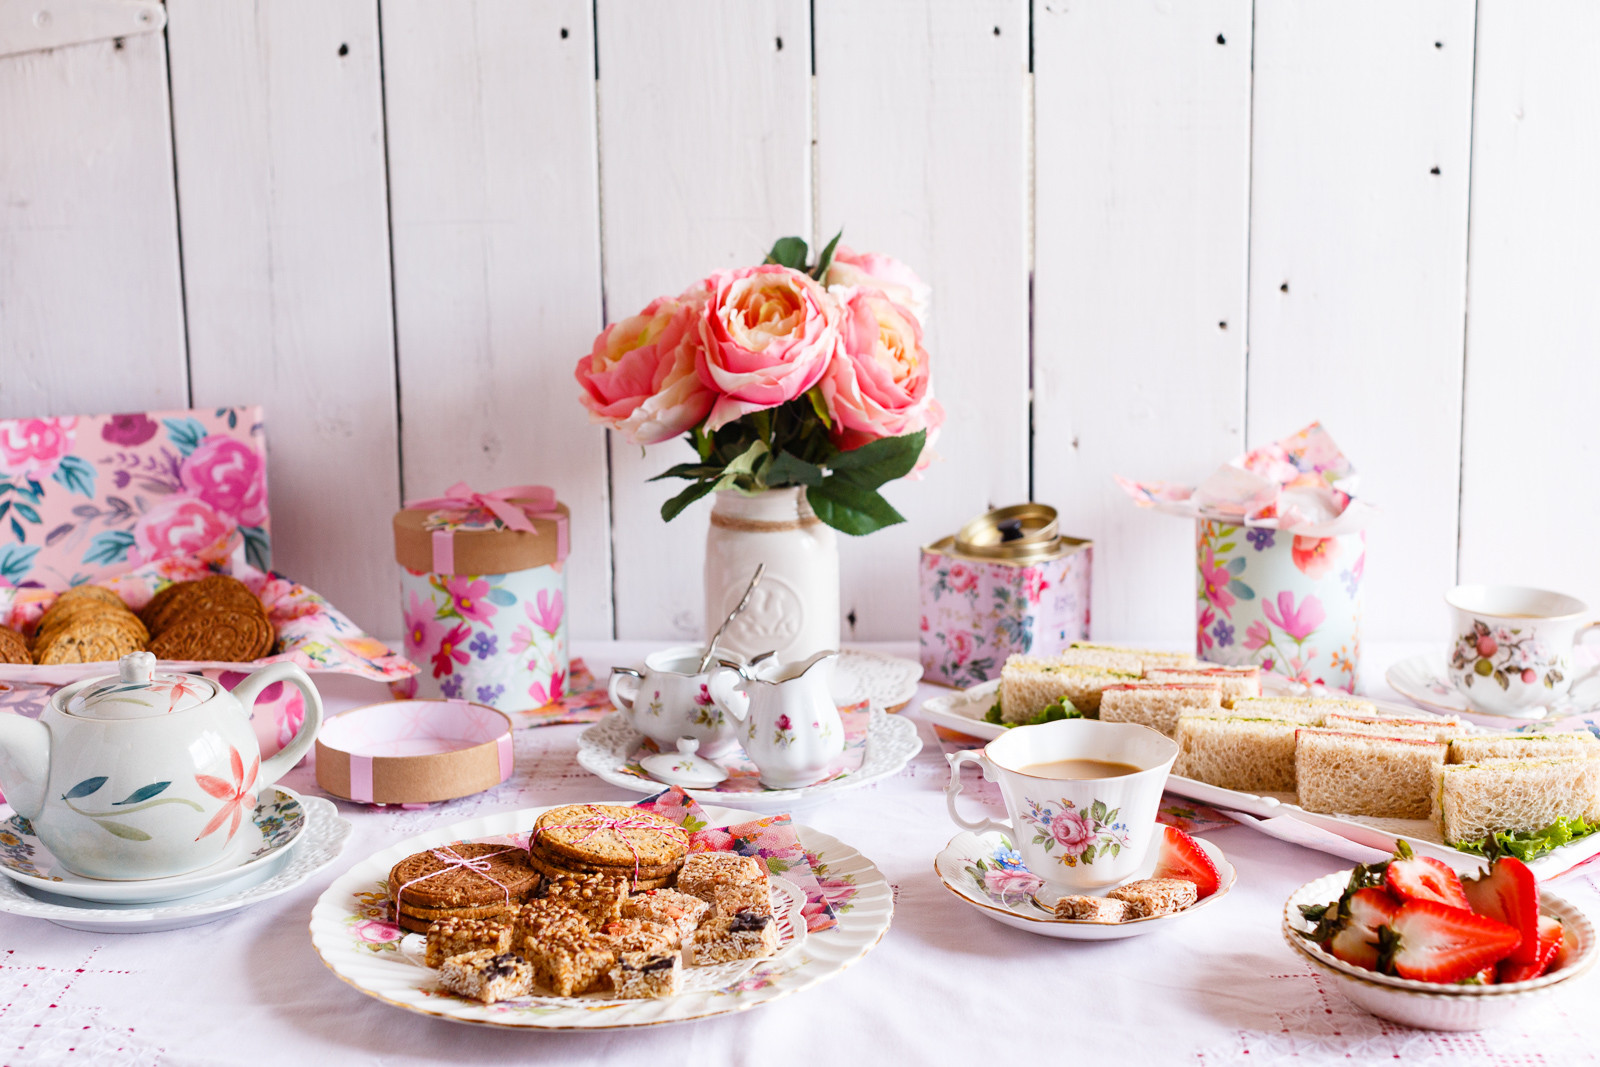 Morning Tea Party Food Ideas
 Afternoon Tea Party for Kids Nature s Path